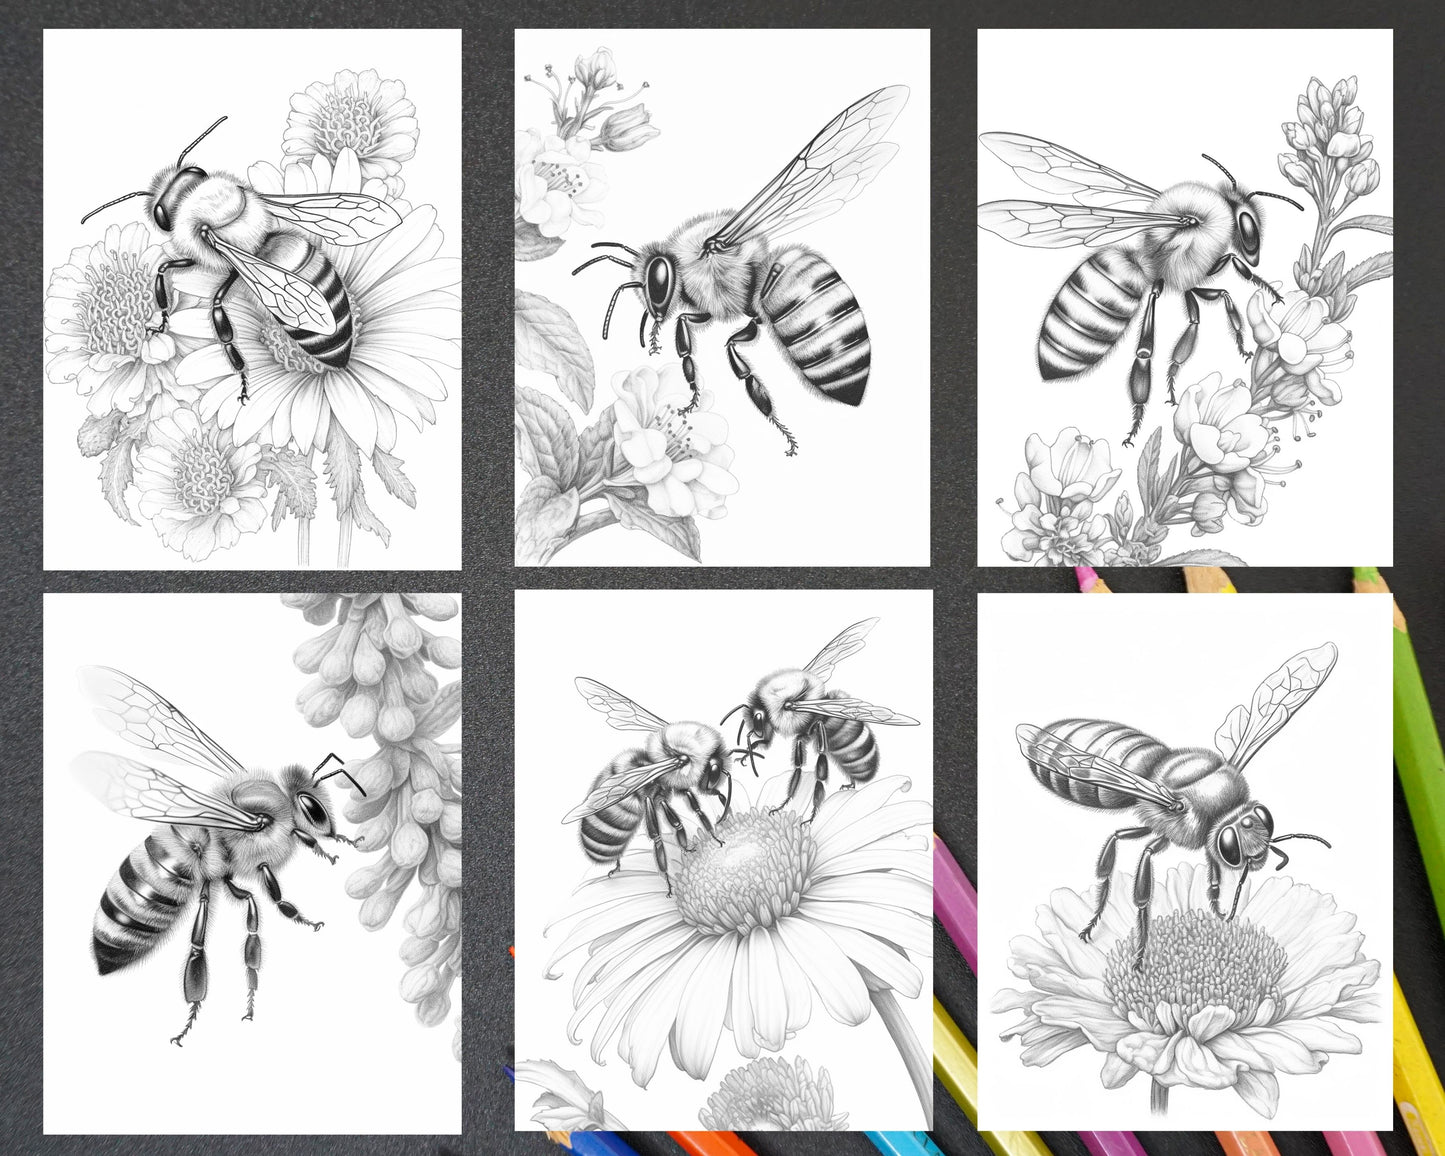 Vintage botanical bee grayscale coloring page for adults, Printable grayscale coloring sheet with detailed botanical illustration, Black and white bee-themed coloring activity for relaxation